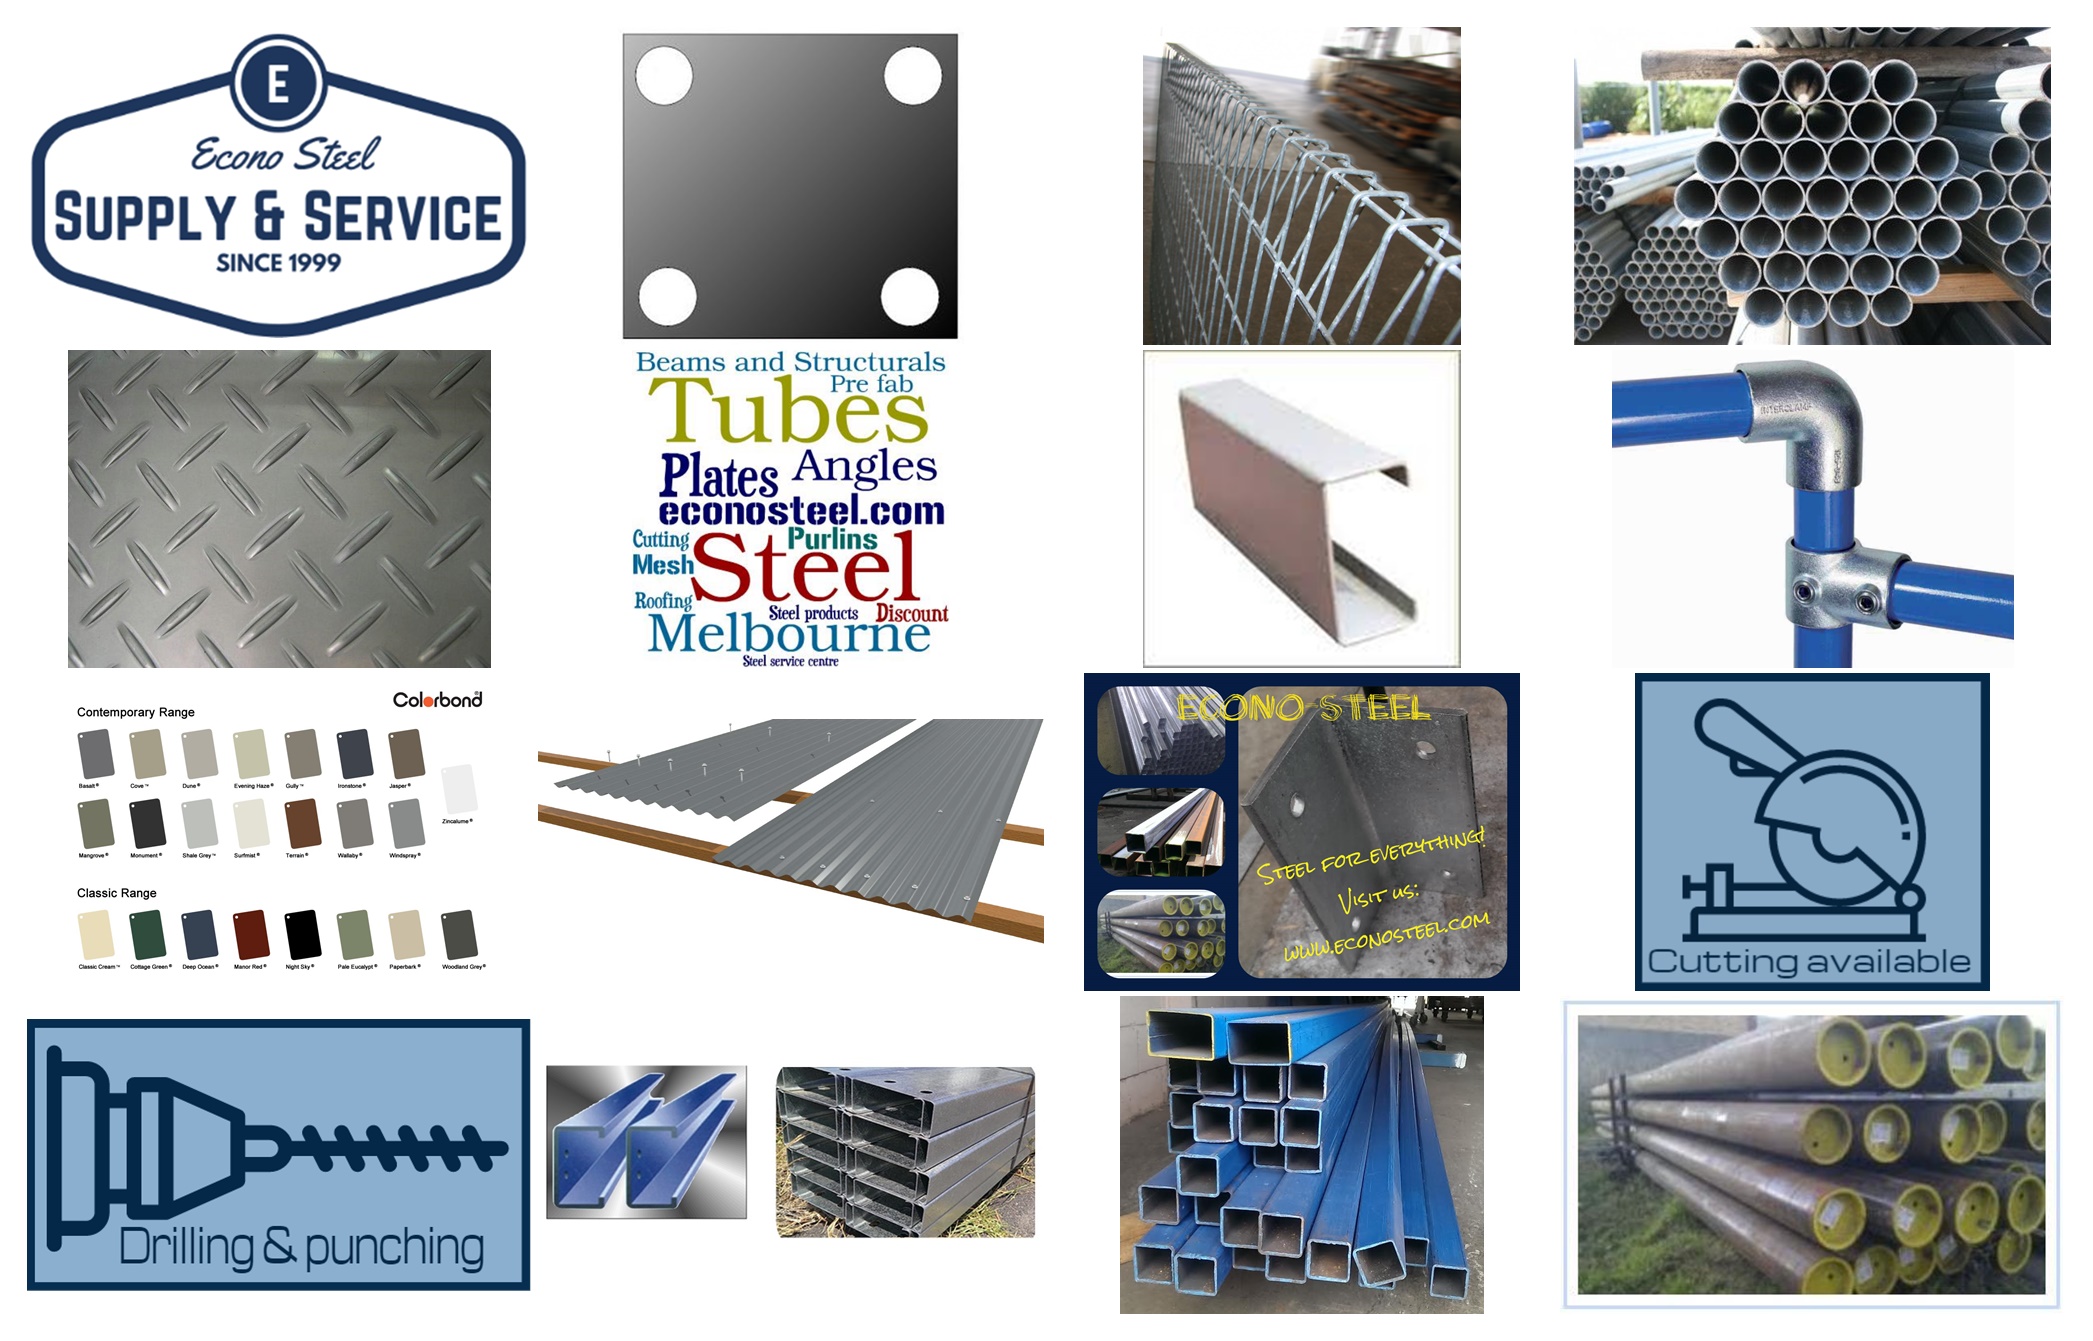 builders steel, Our team of experts works closely with each customer to understand their unique needs and provide customized steel products to meet those requirements.